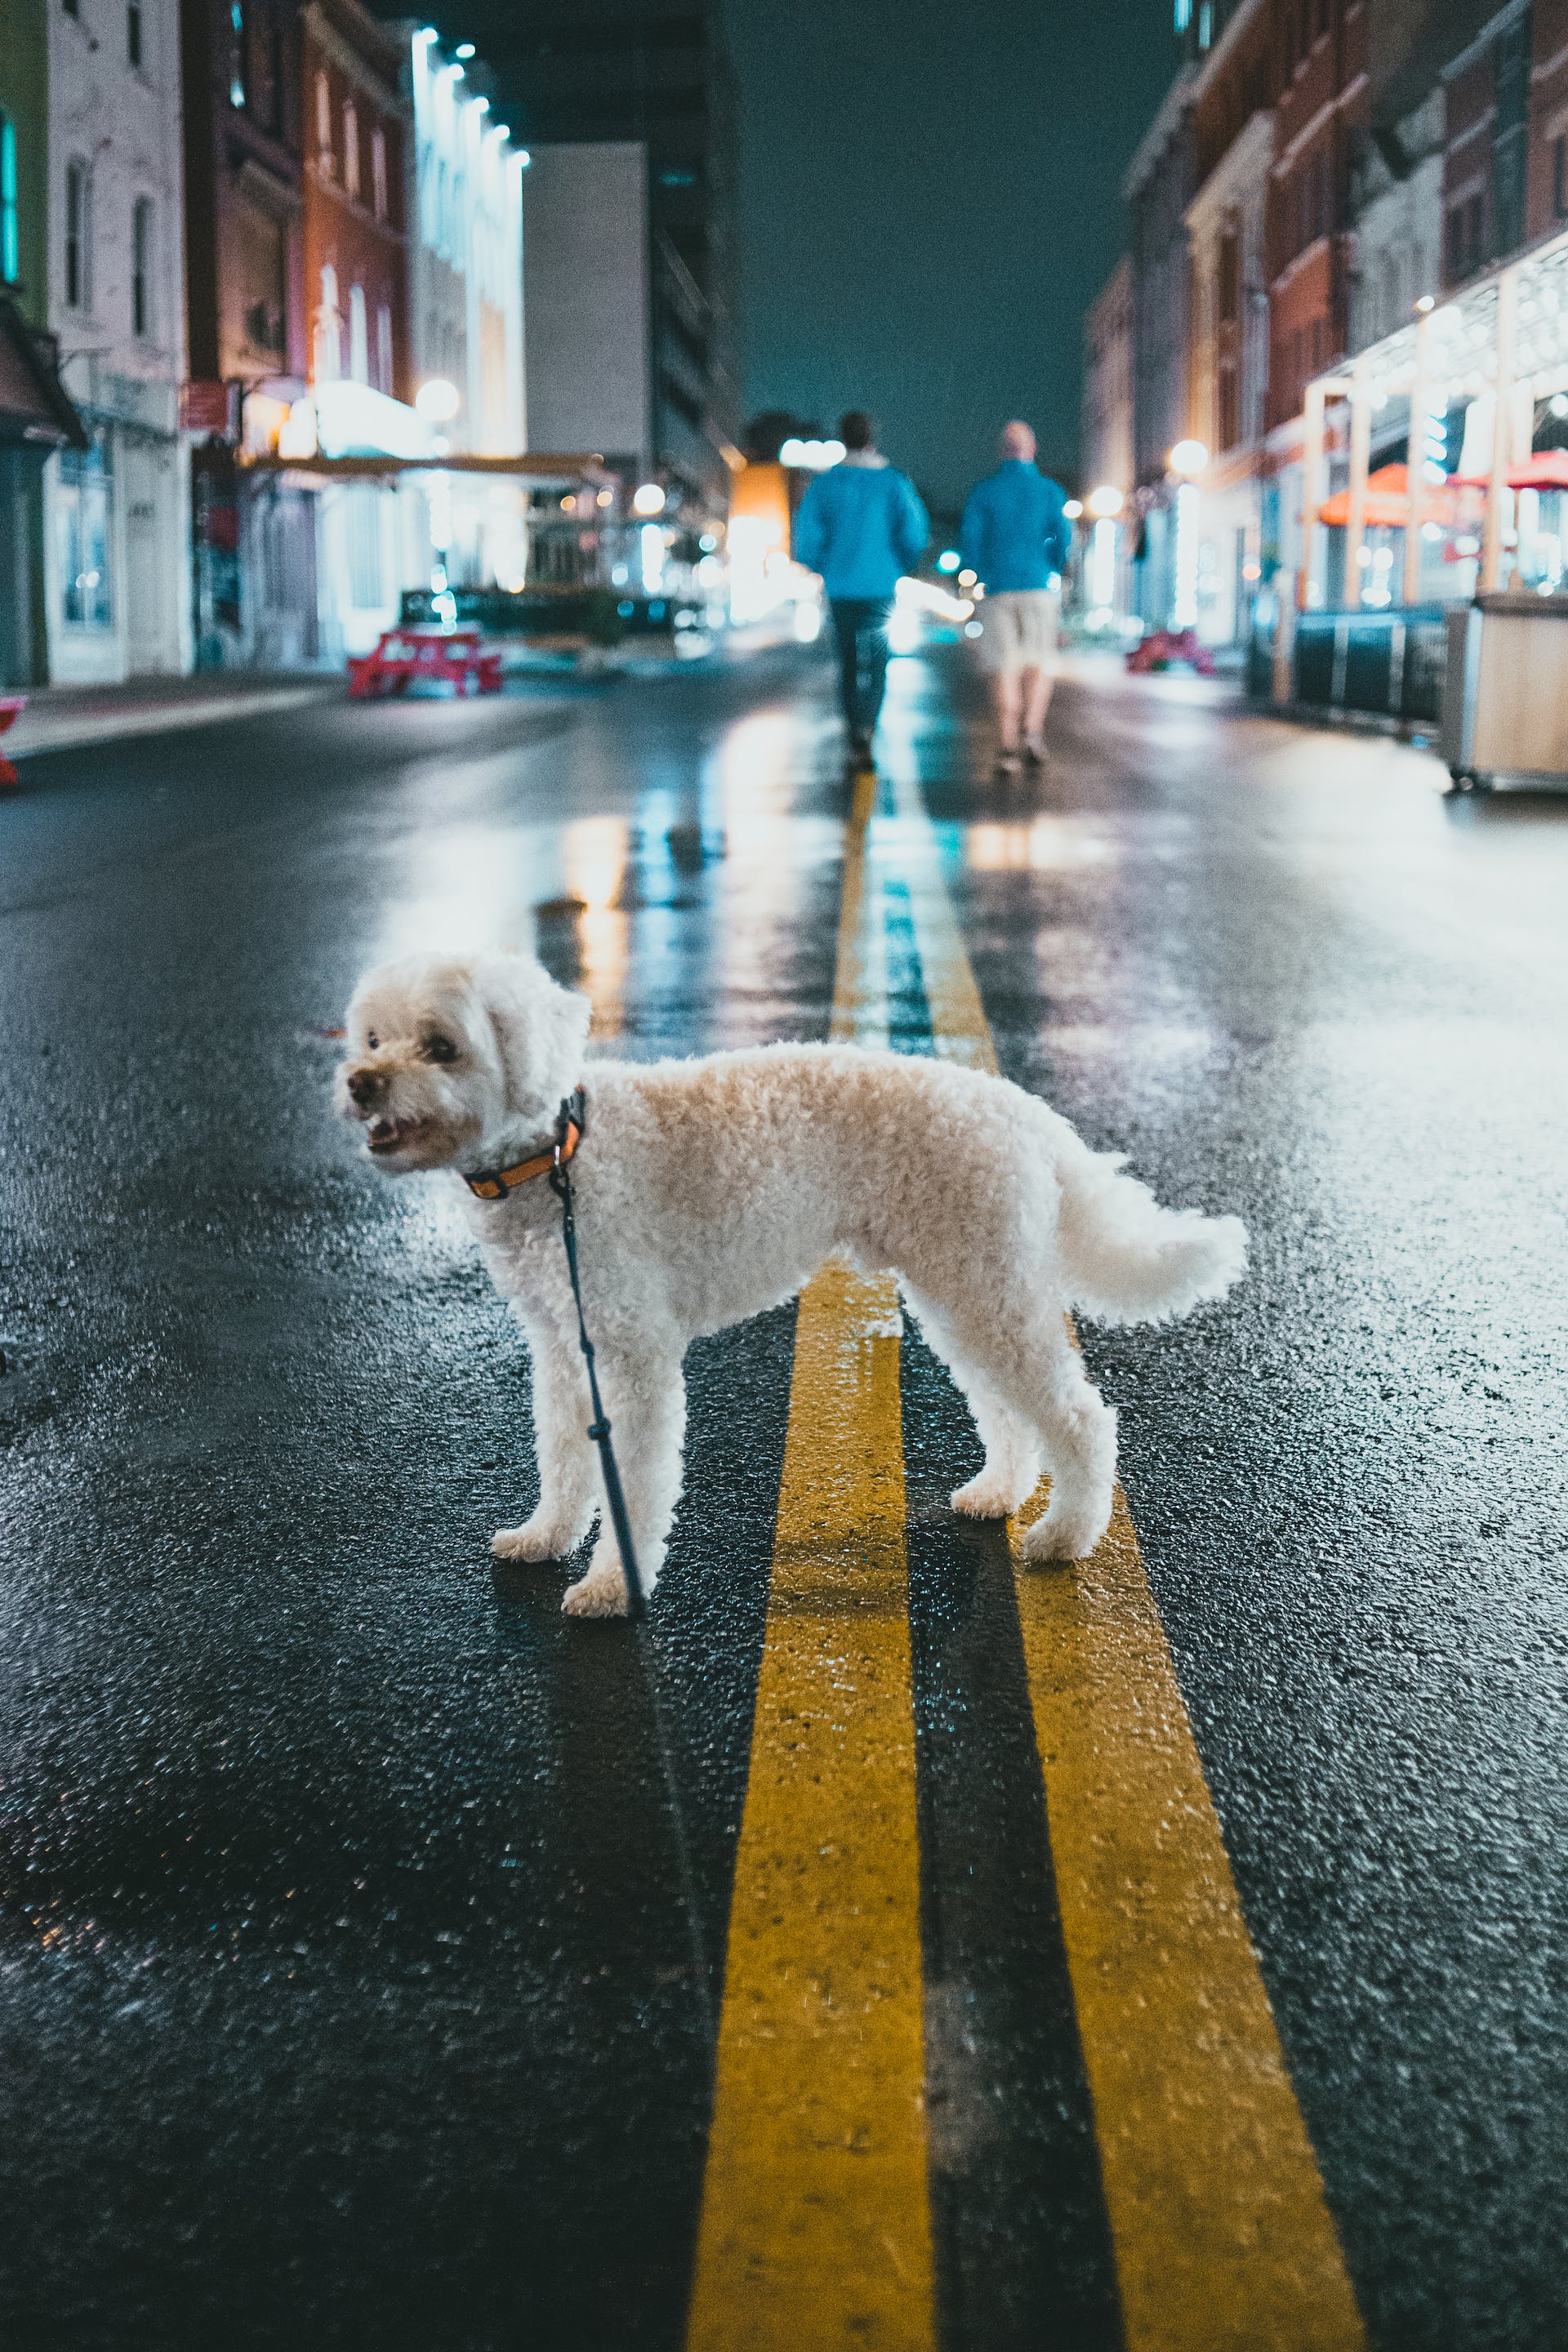 White poodle standing in the middle of a road | Source: Pexels